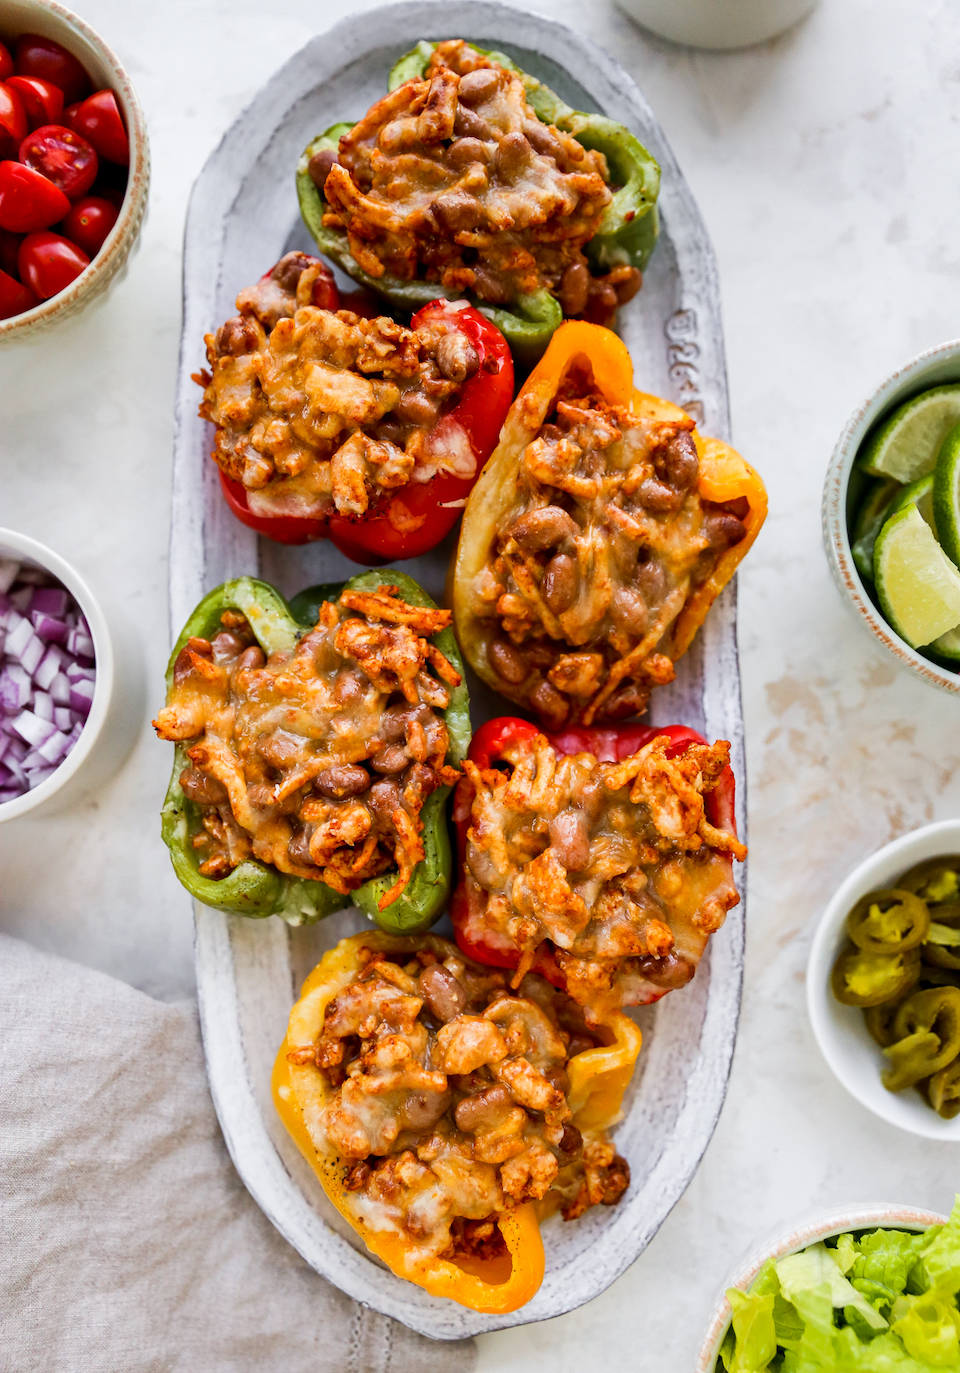 Chicken Taco Stuffed Peppers - Yes to Yolks